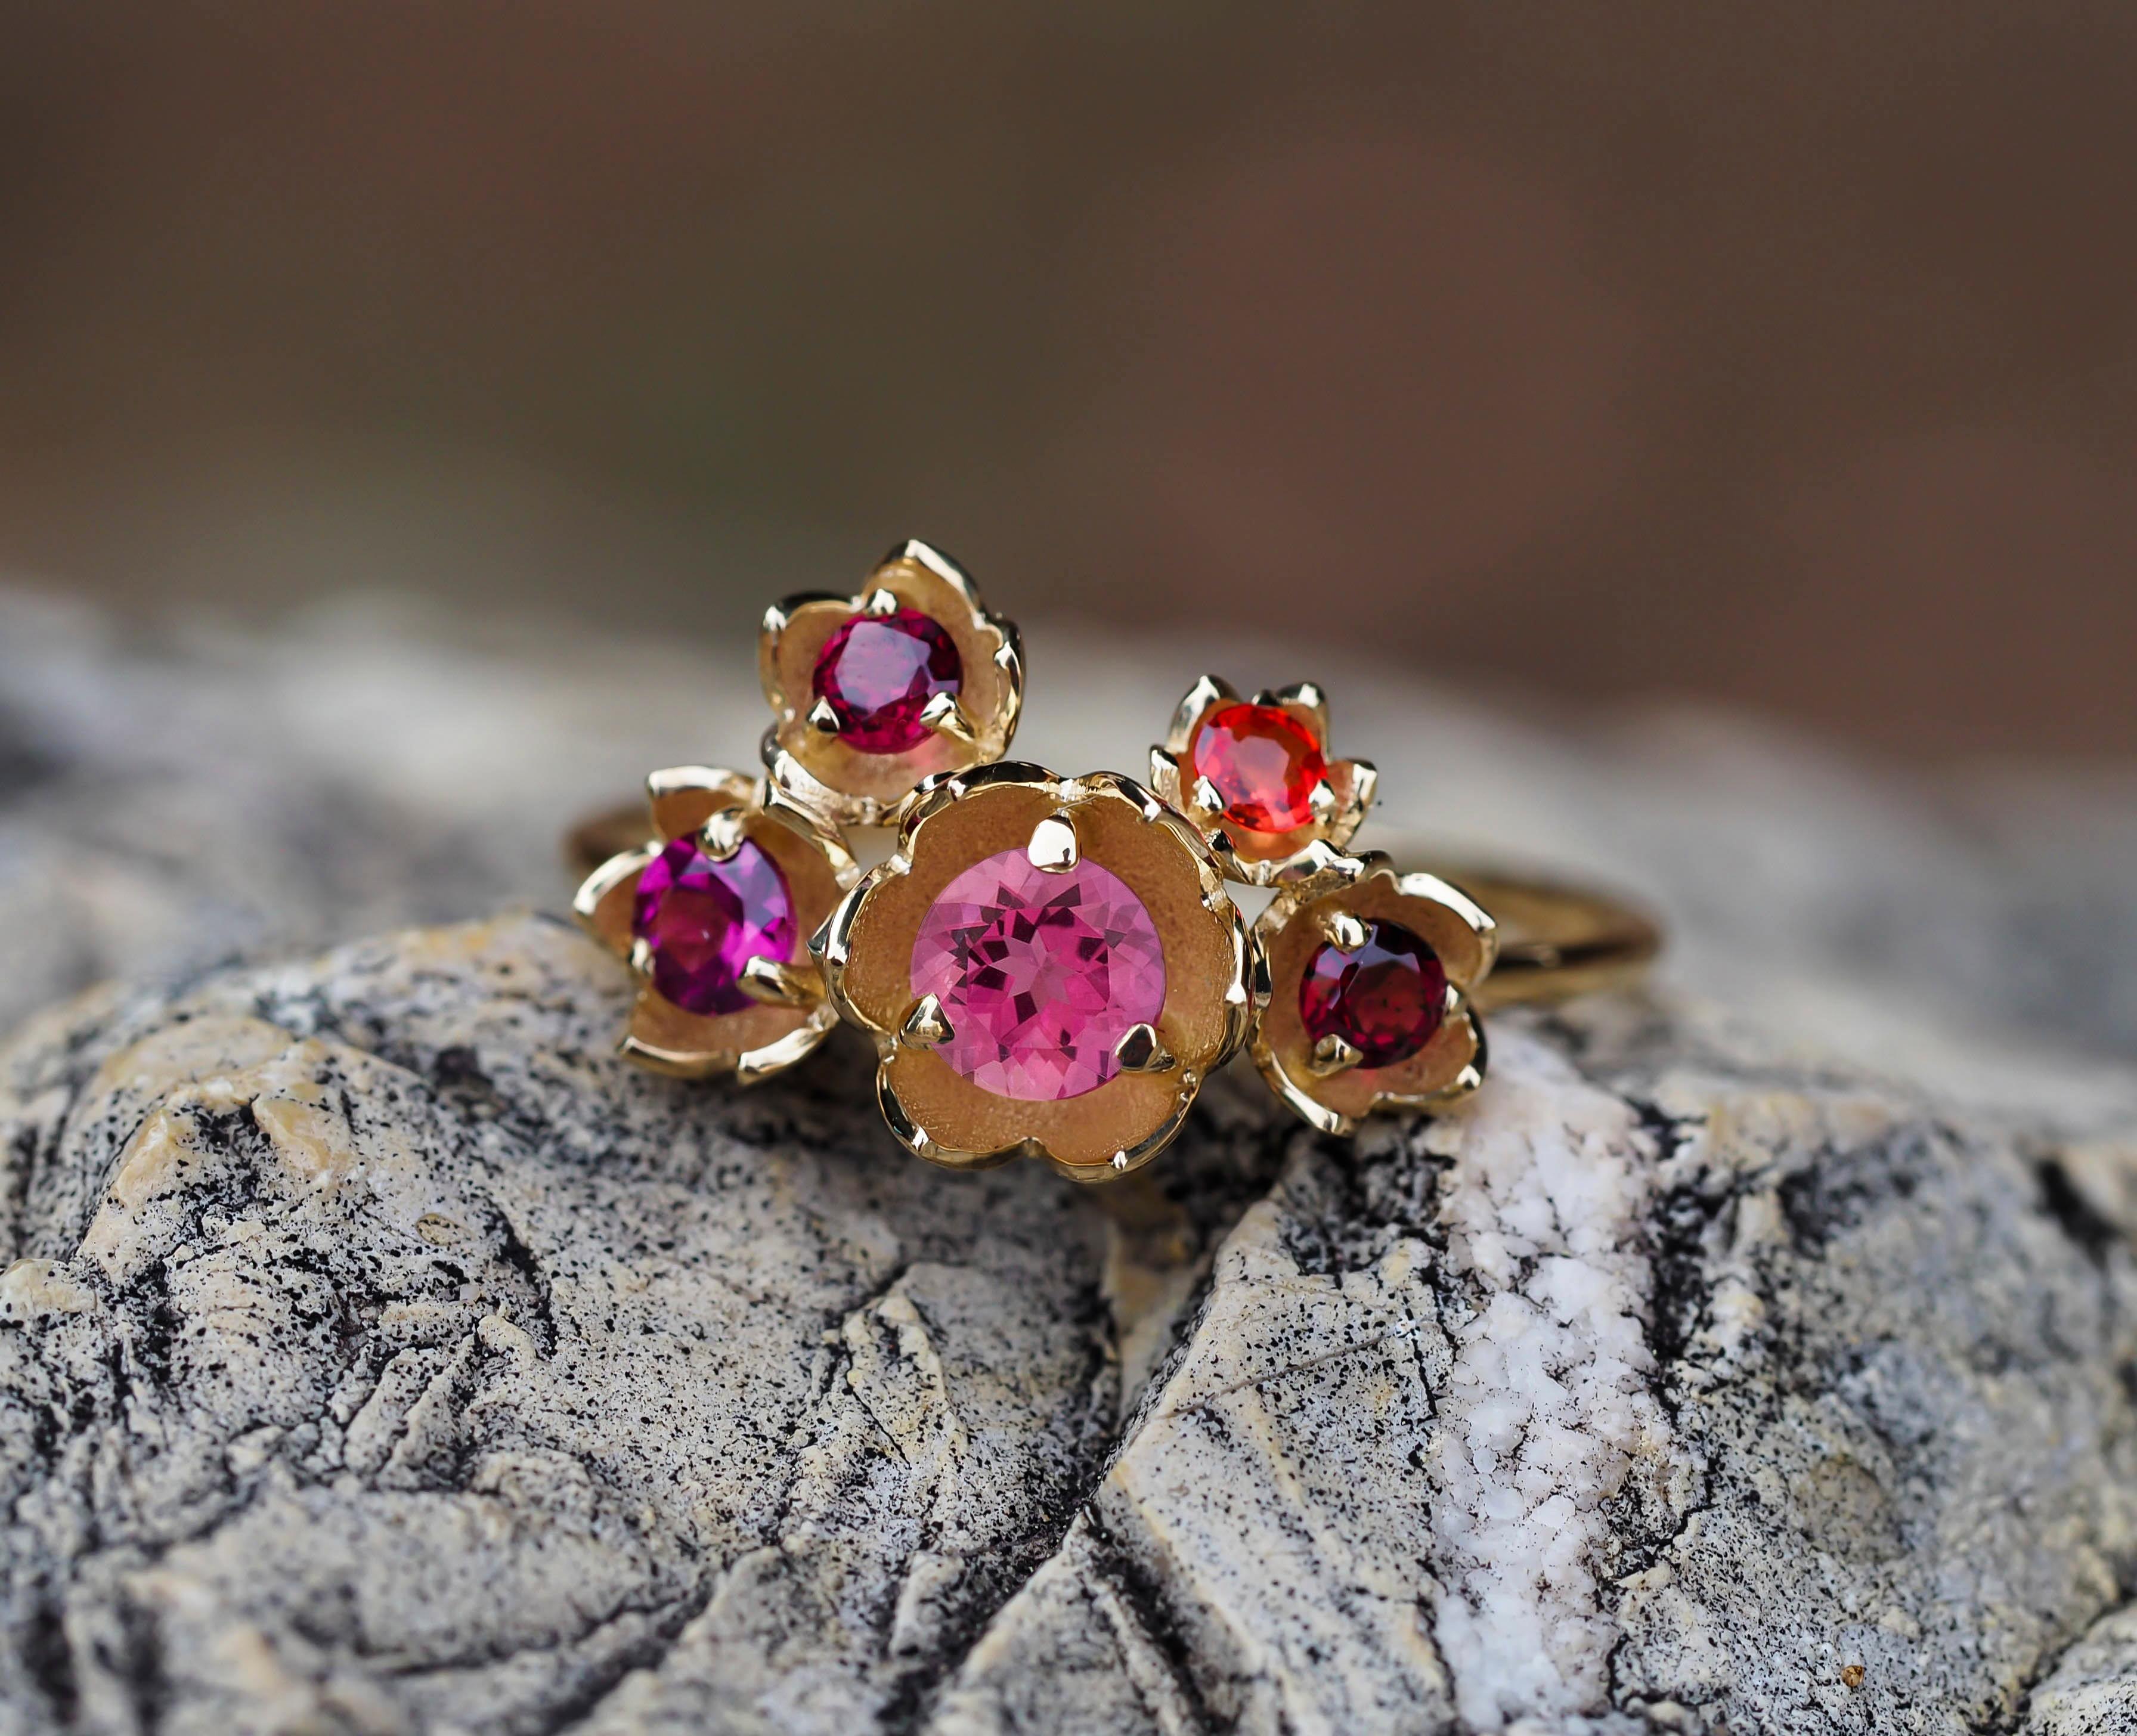 14 Karat Gold Blossom Ring with Multicolored Gemstones, Pink Tourmaline Ring 4